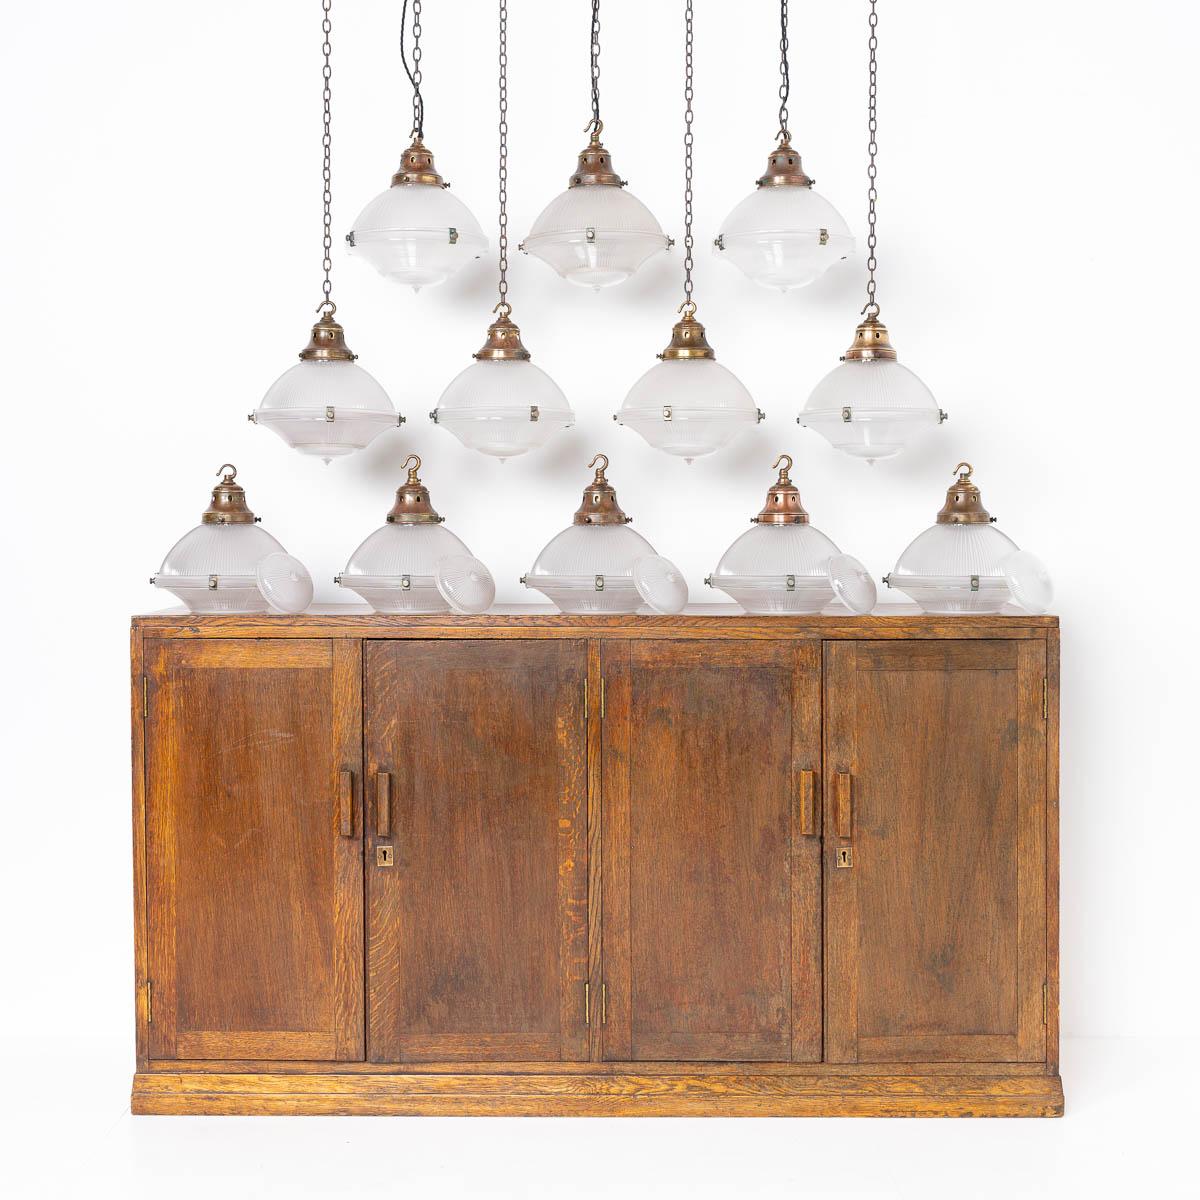 A RARE RUN OF MEDIUM HOLOPHANE THREE PART PENDANT LIGHTS 

PRICE IS PER LIGHT

A stunning run of 12 vintage Holophane pendant lights reclaimed from an abandoned 150 year old chapel originally built in 1876 in the heart of Gwynedd village in